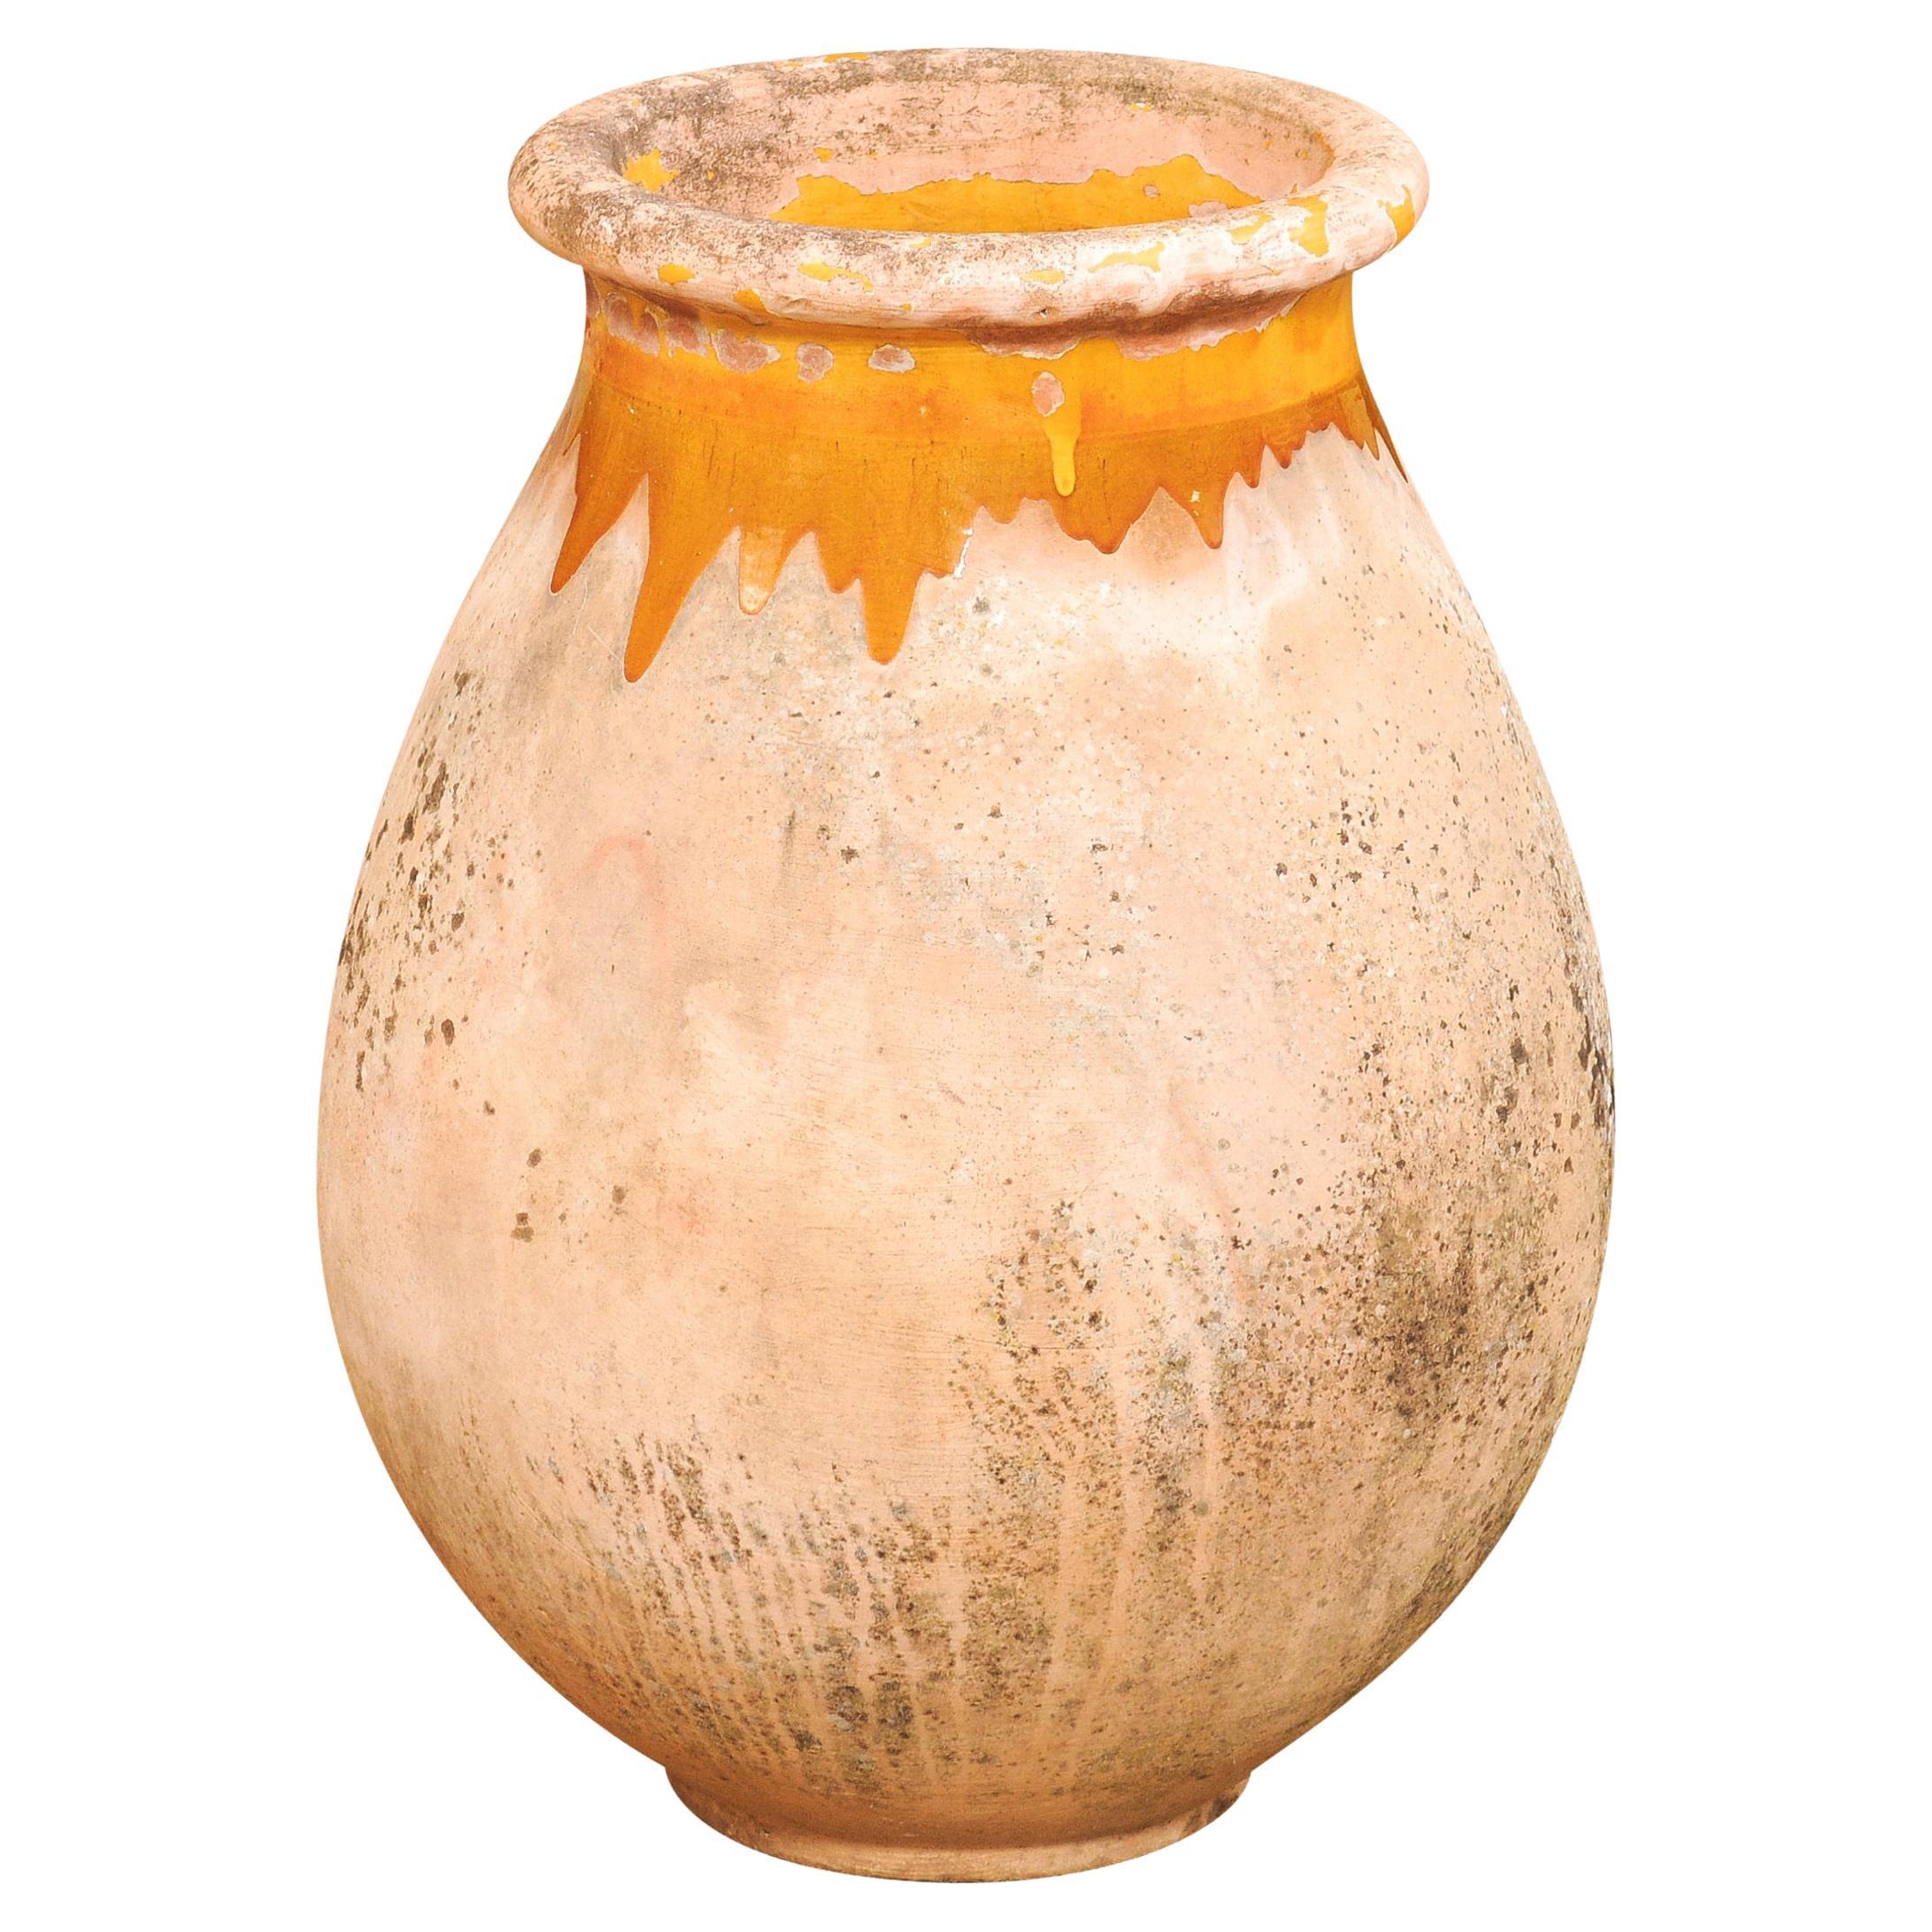 French 19th Century Biot Pottery Jar with Yellow Glaze and Dripping Effect For Sale